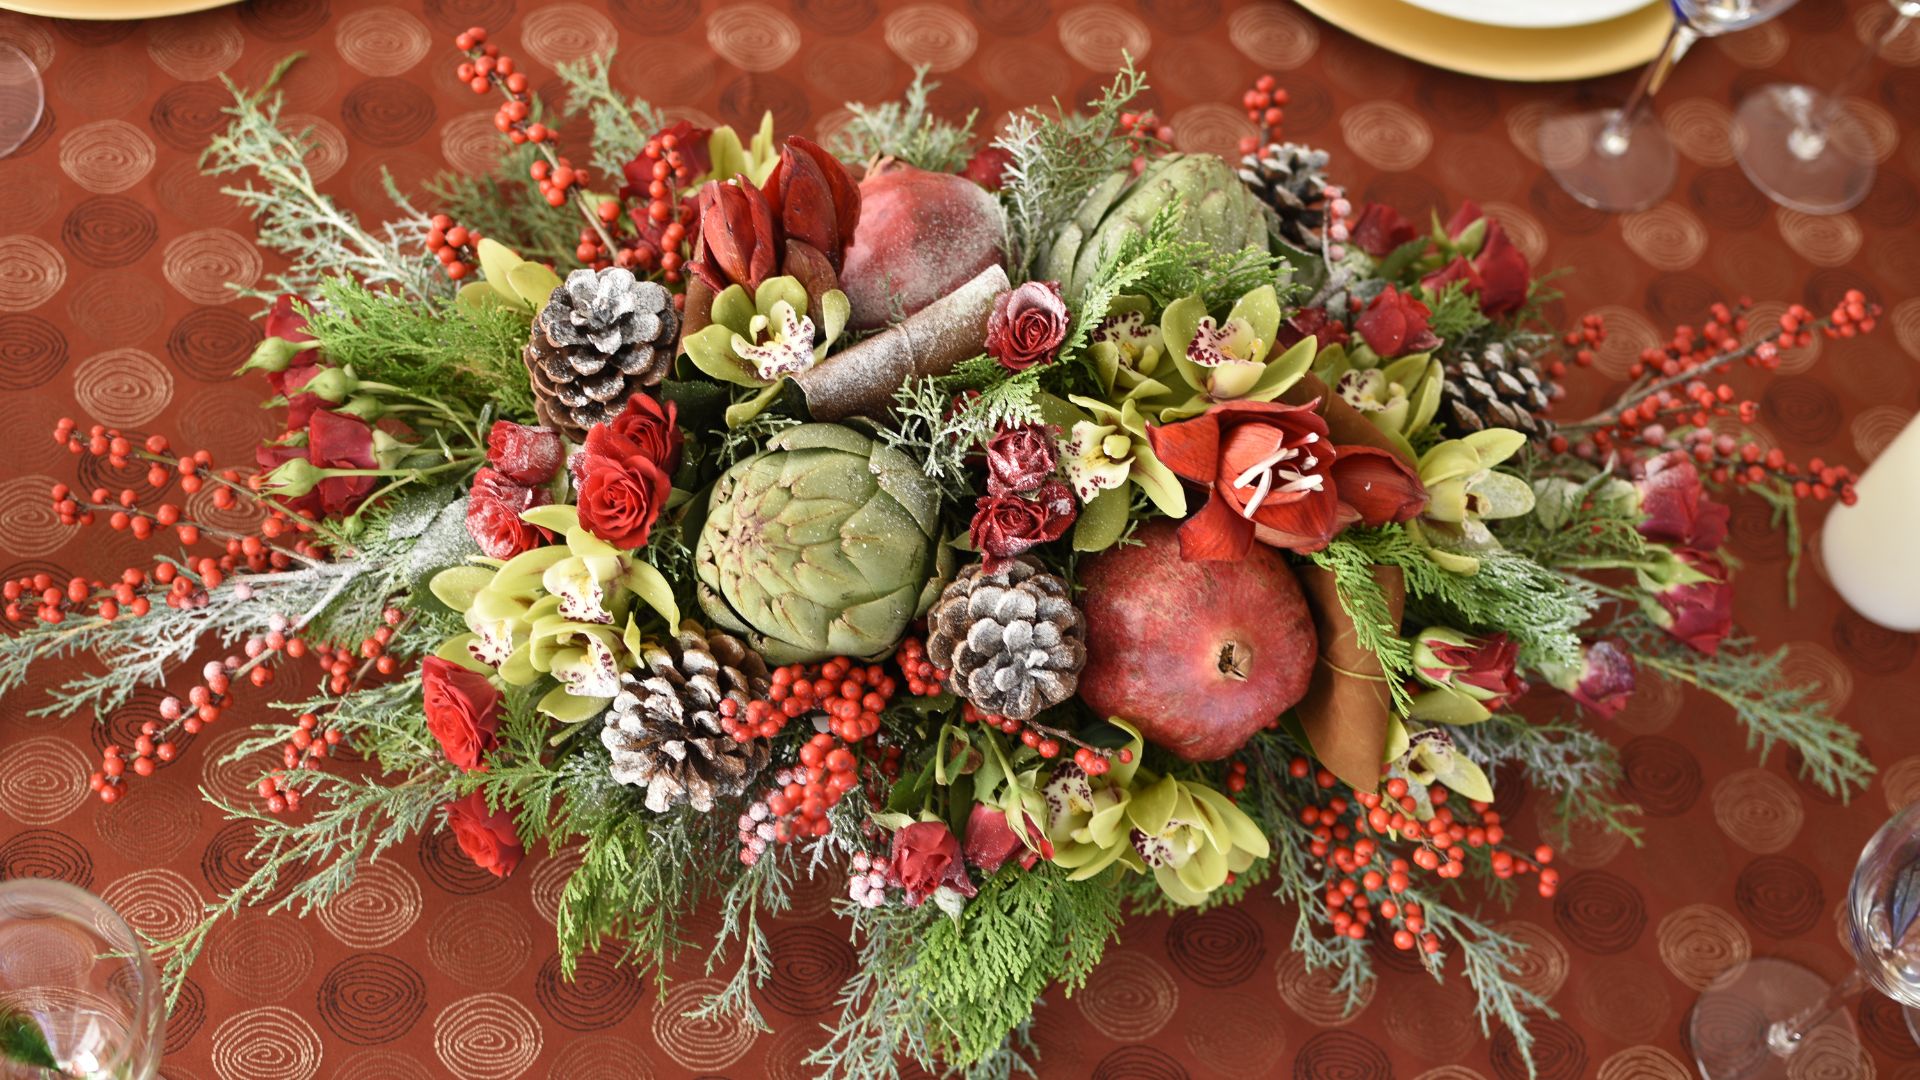 Amazing Holiday Centerpiece Ideas for Your Table